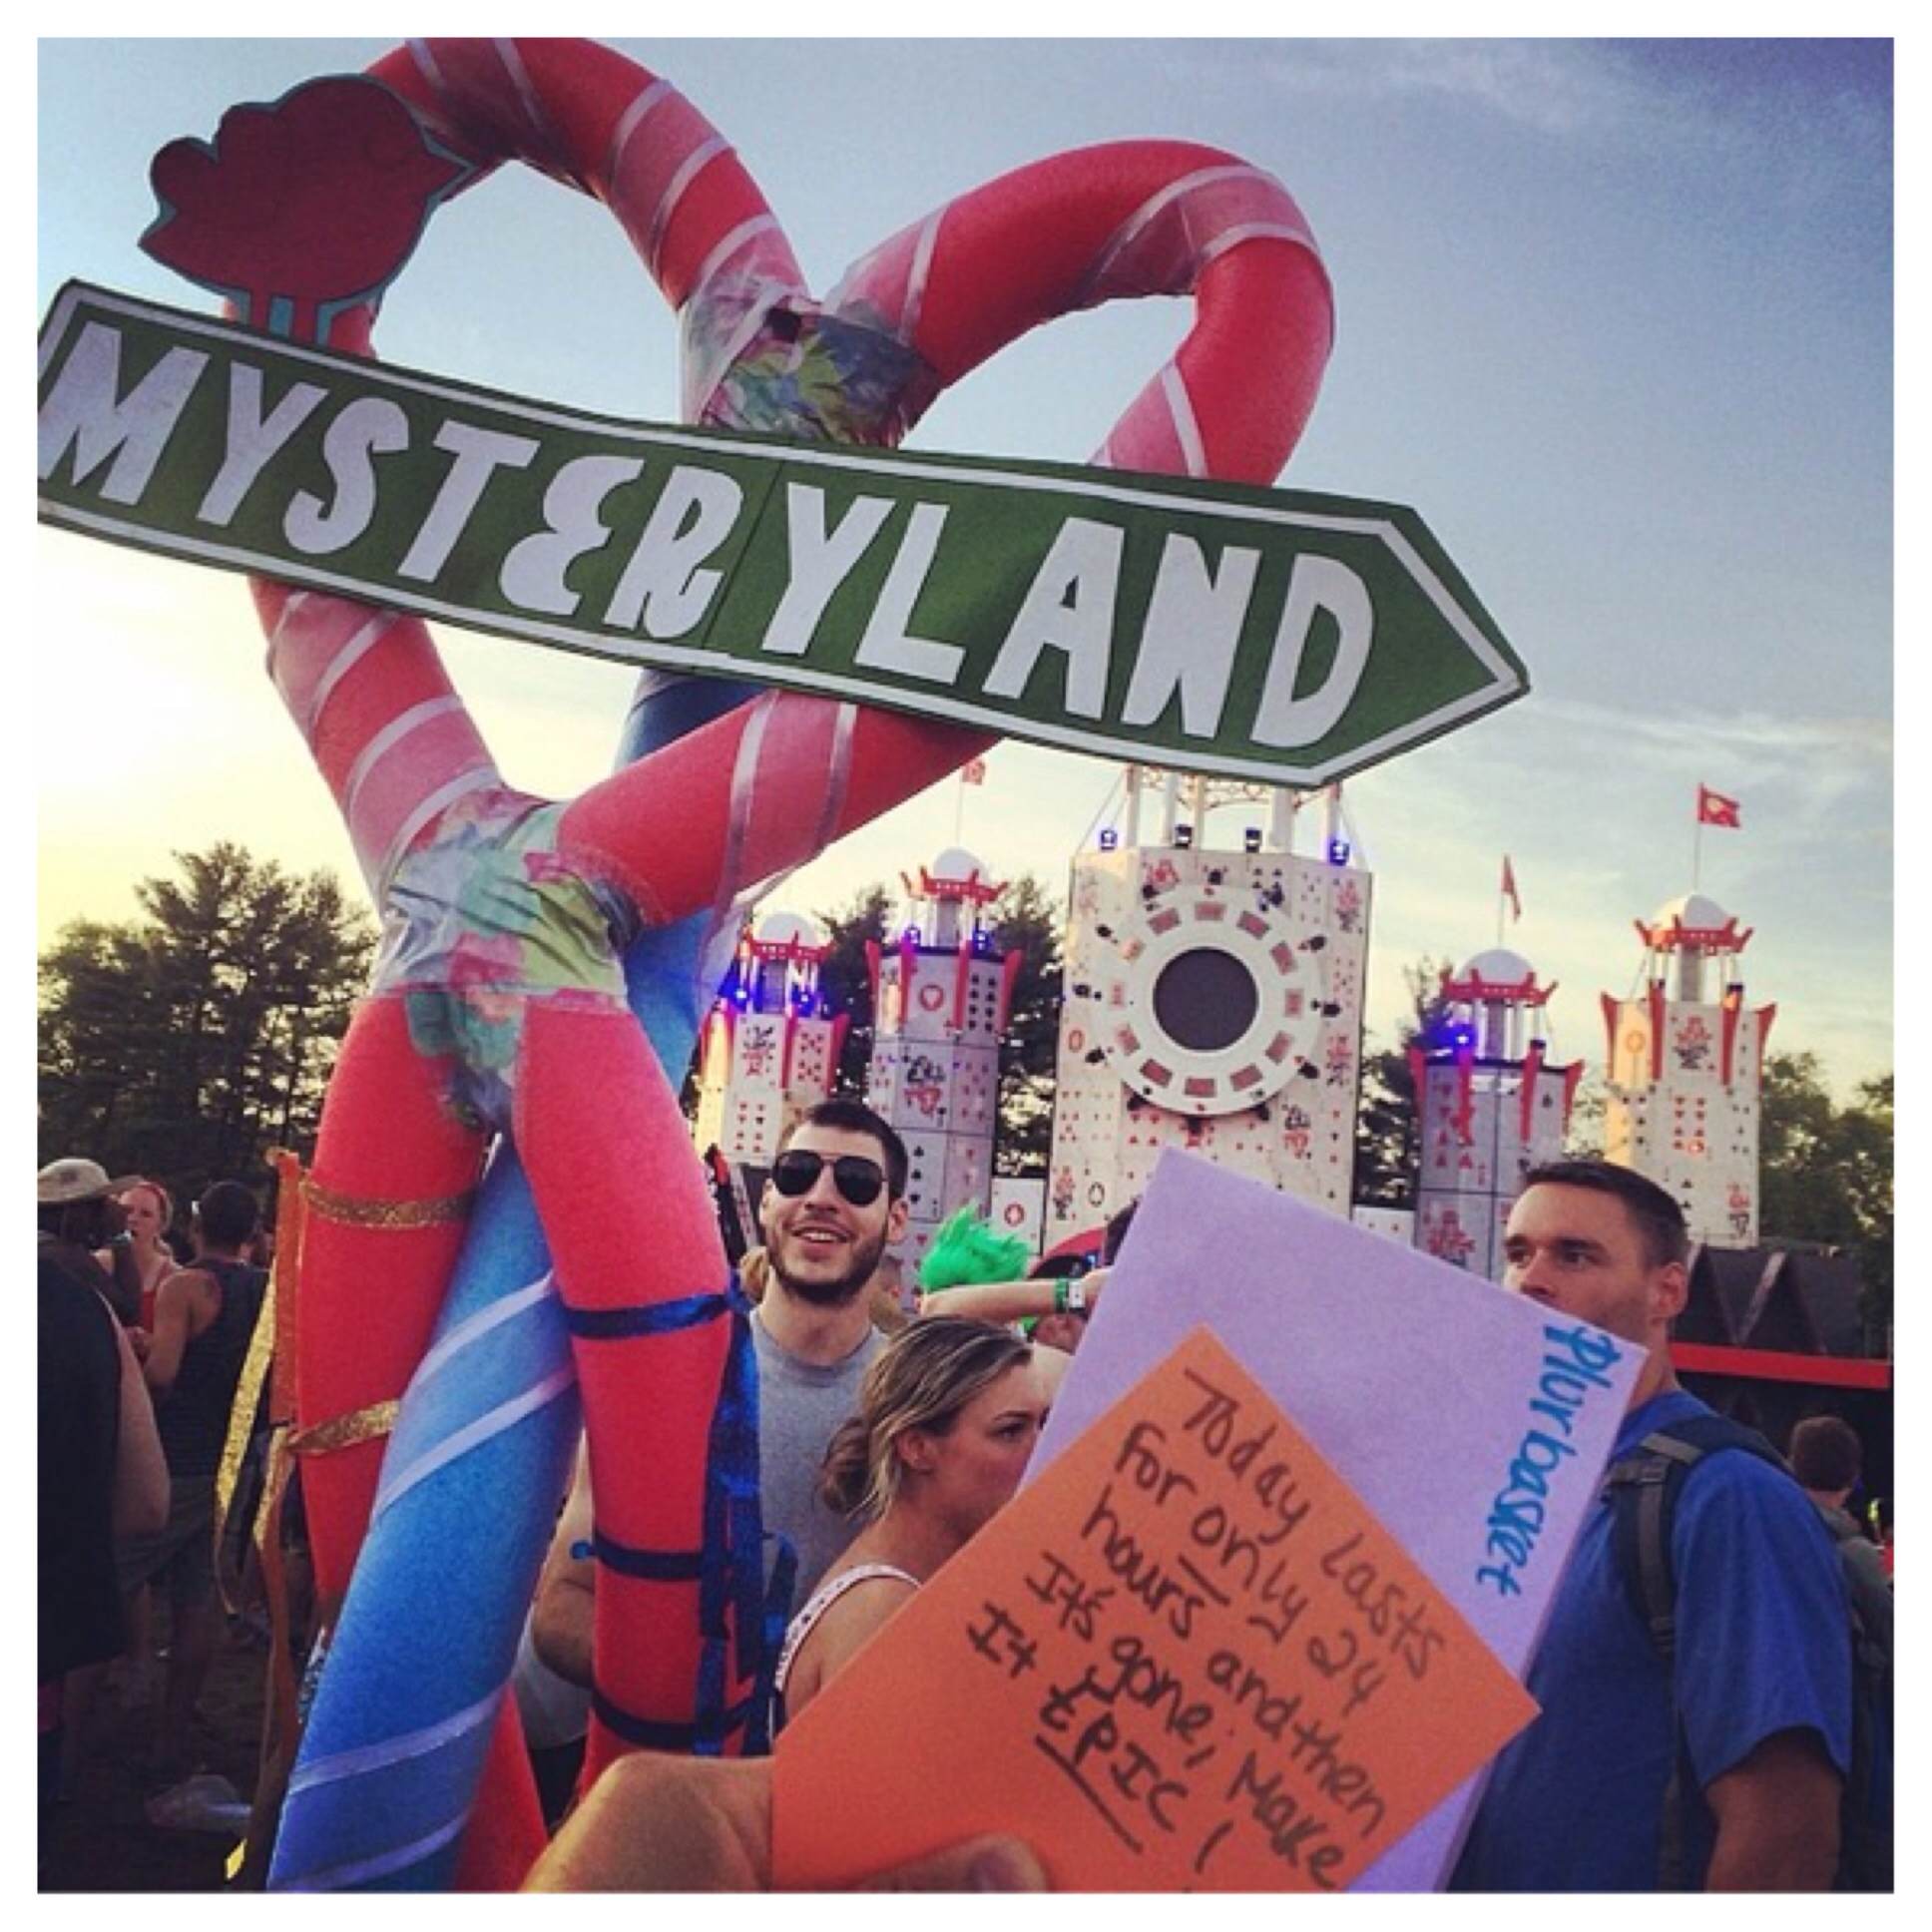 16 Of Our Favorite Totems From Mysteryland USA 2014 ... - 1936 x 1936 jpeg 266kB